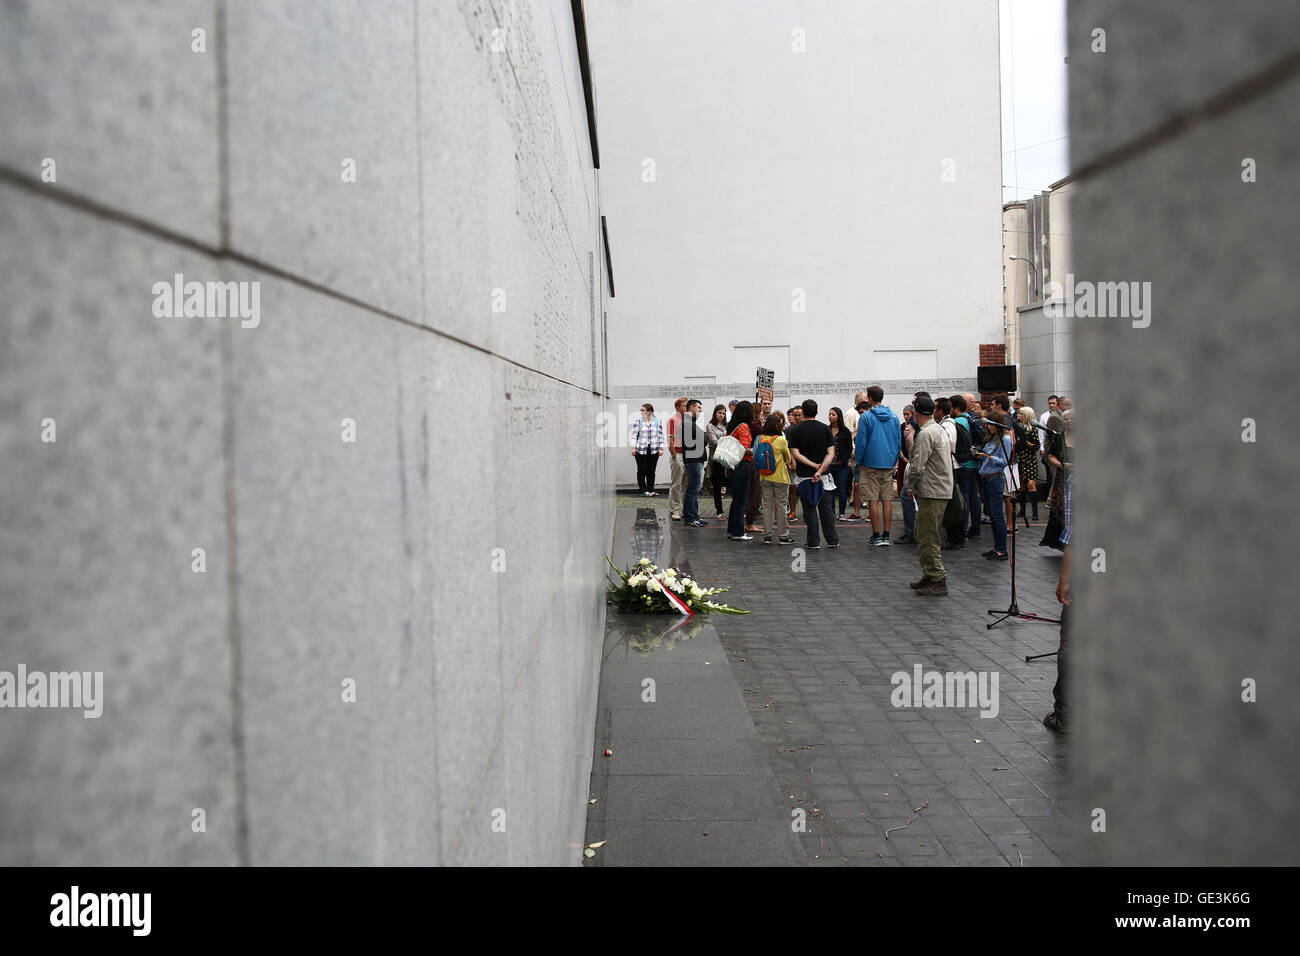 Poland, Warsaw, 22nd Uly 2016: Protesters held march in memory of murdered jews in 1942 walking around the Warsaw ghetto area of Second World War Credit: Jake Ratz/Alamy Live News Stock Photo